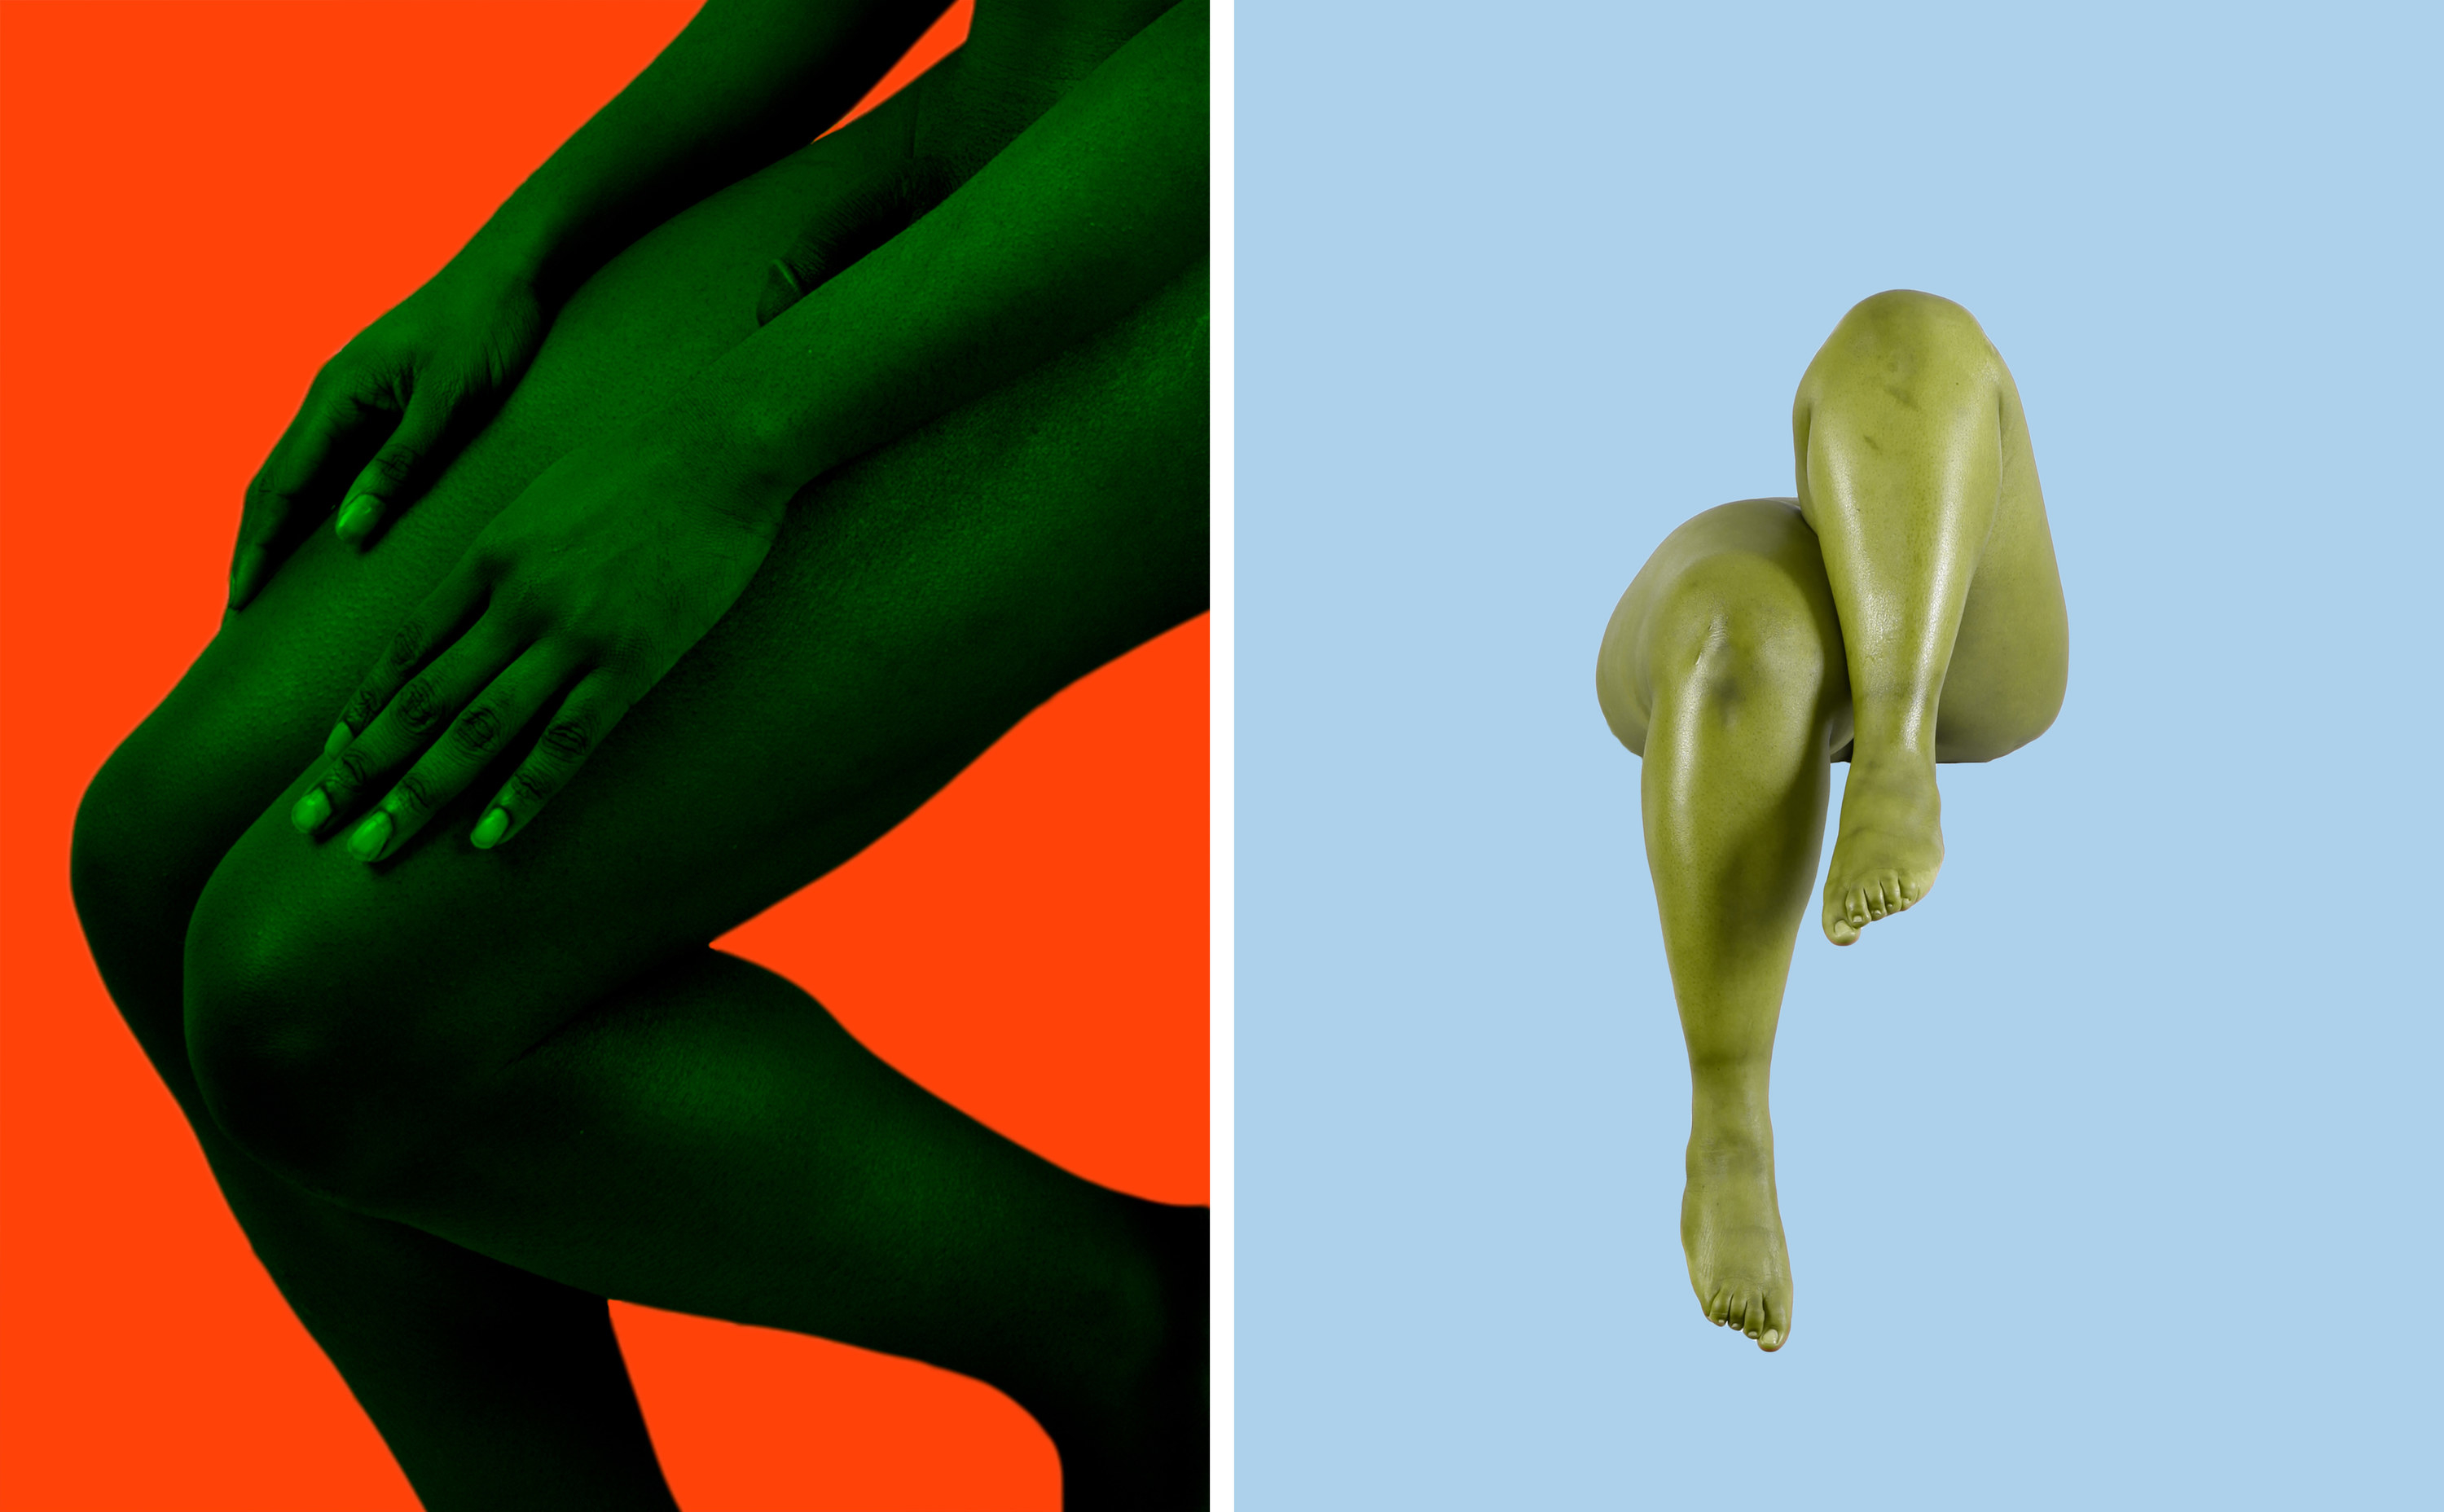 Disembodied body parts on color backgrounds